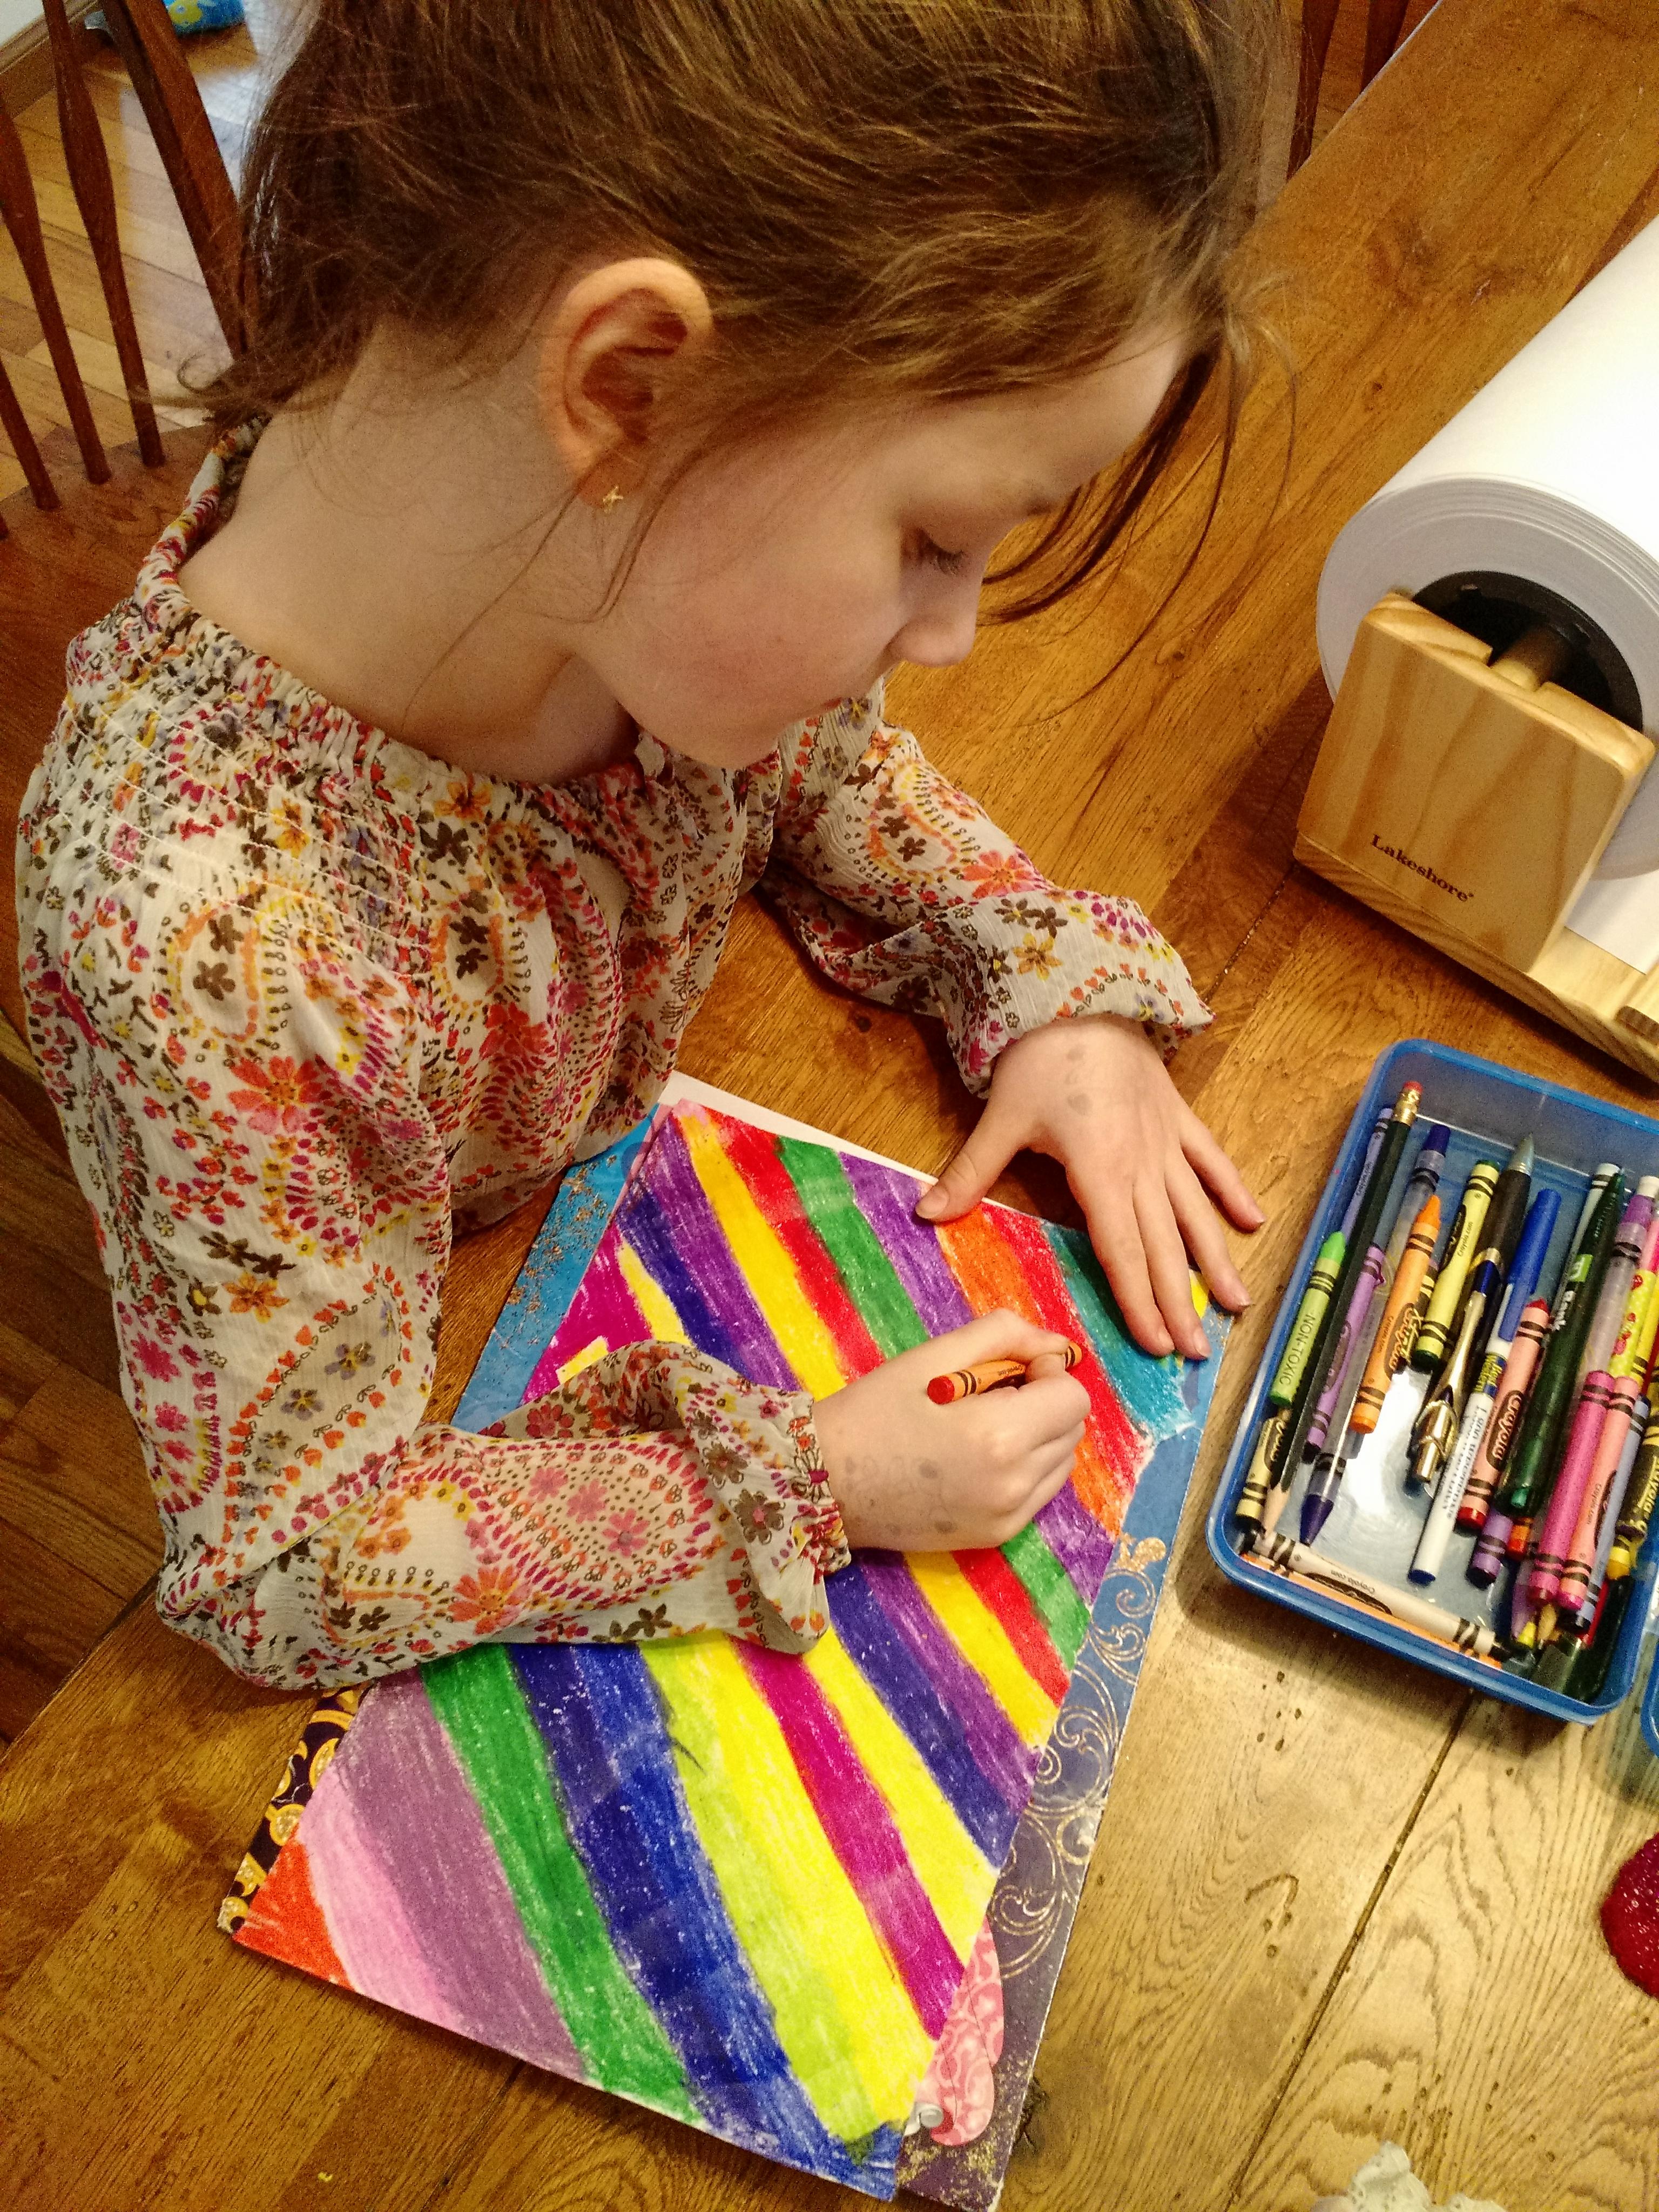 How to Make Your Own Scratch Art with Crayons